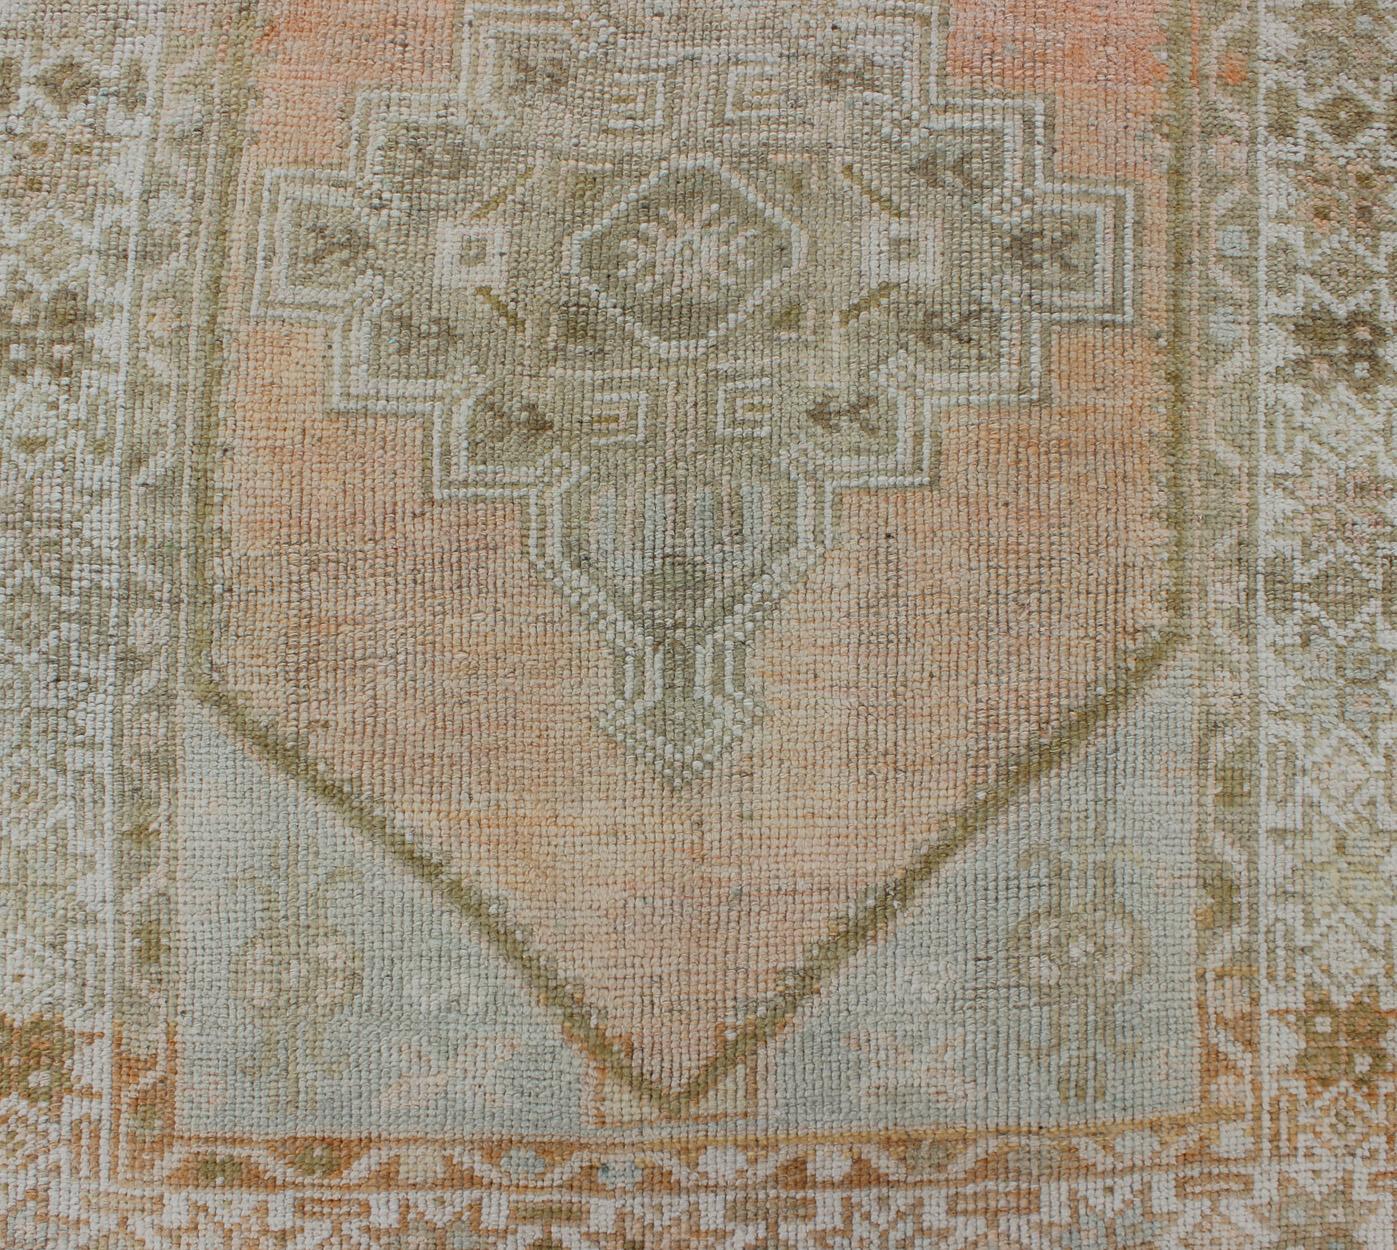 Vintage Turkish Oushak Runner with Faded Coral, Green and Light Brown 1